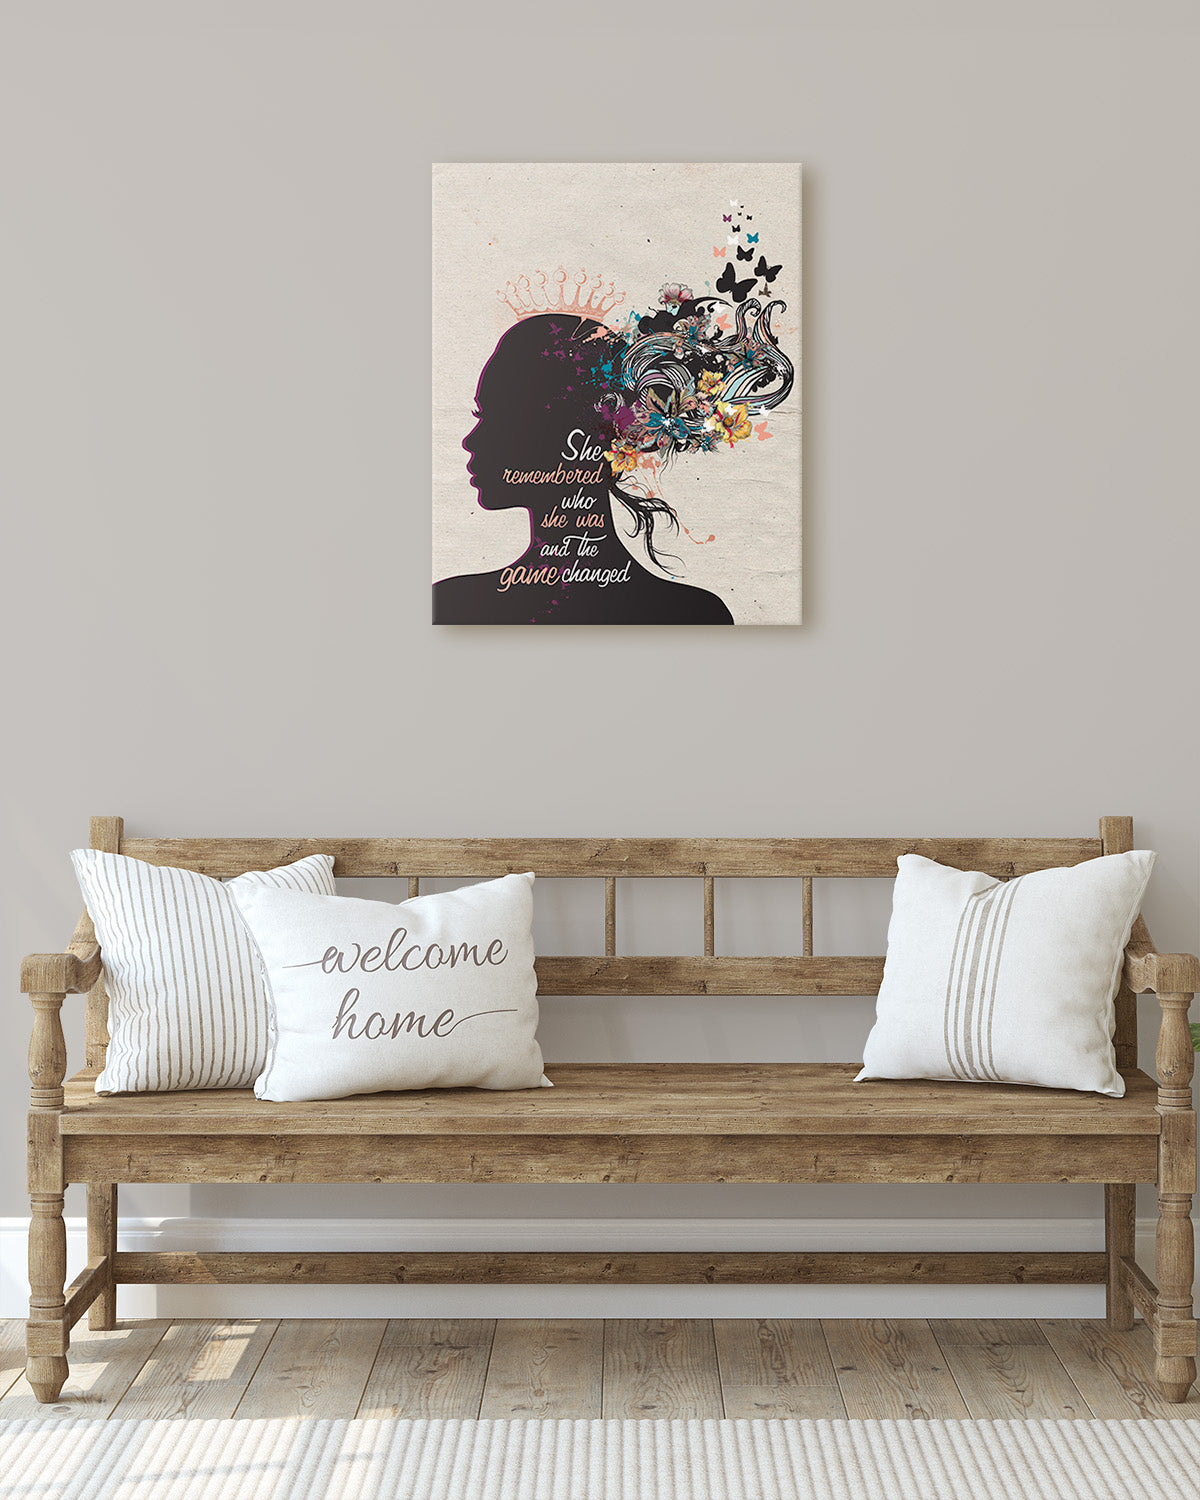 She Remembered Who She Was and The Game Changed Inspirational Wall Art - Positive Affirmations Wall Decor for Women Girls Teens Daughter - Uplifting Aesthetic Home Decor